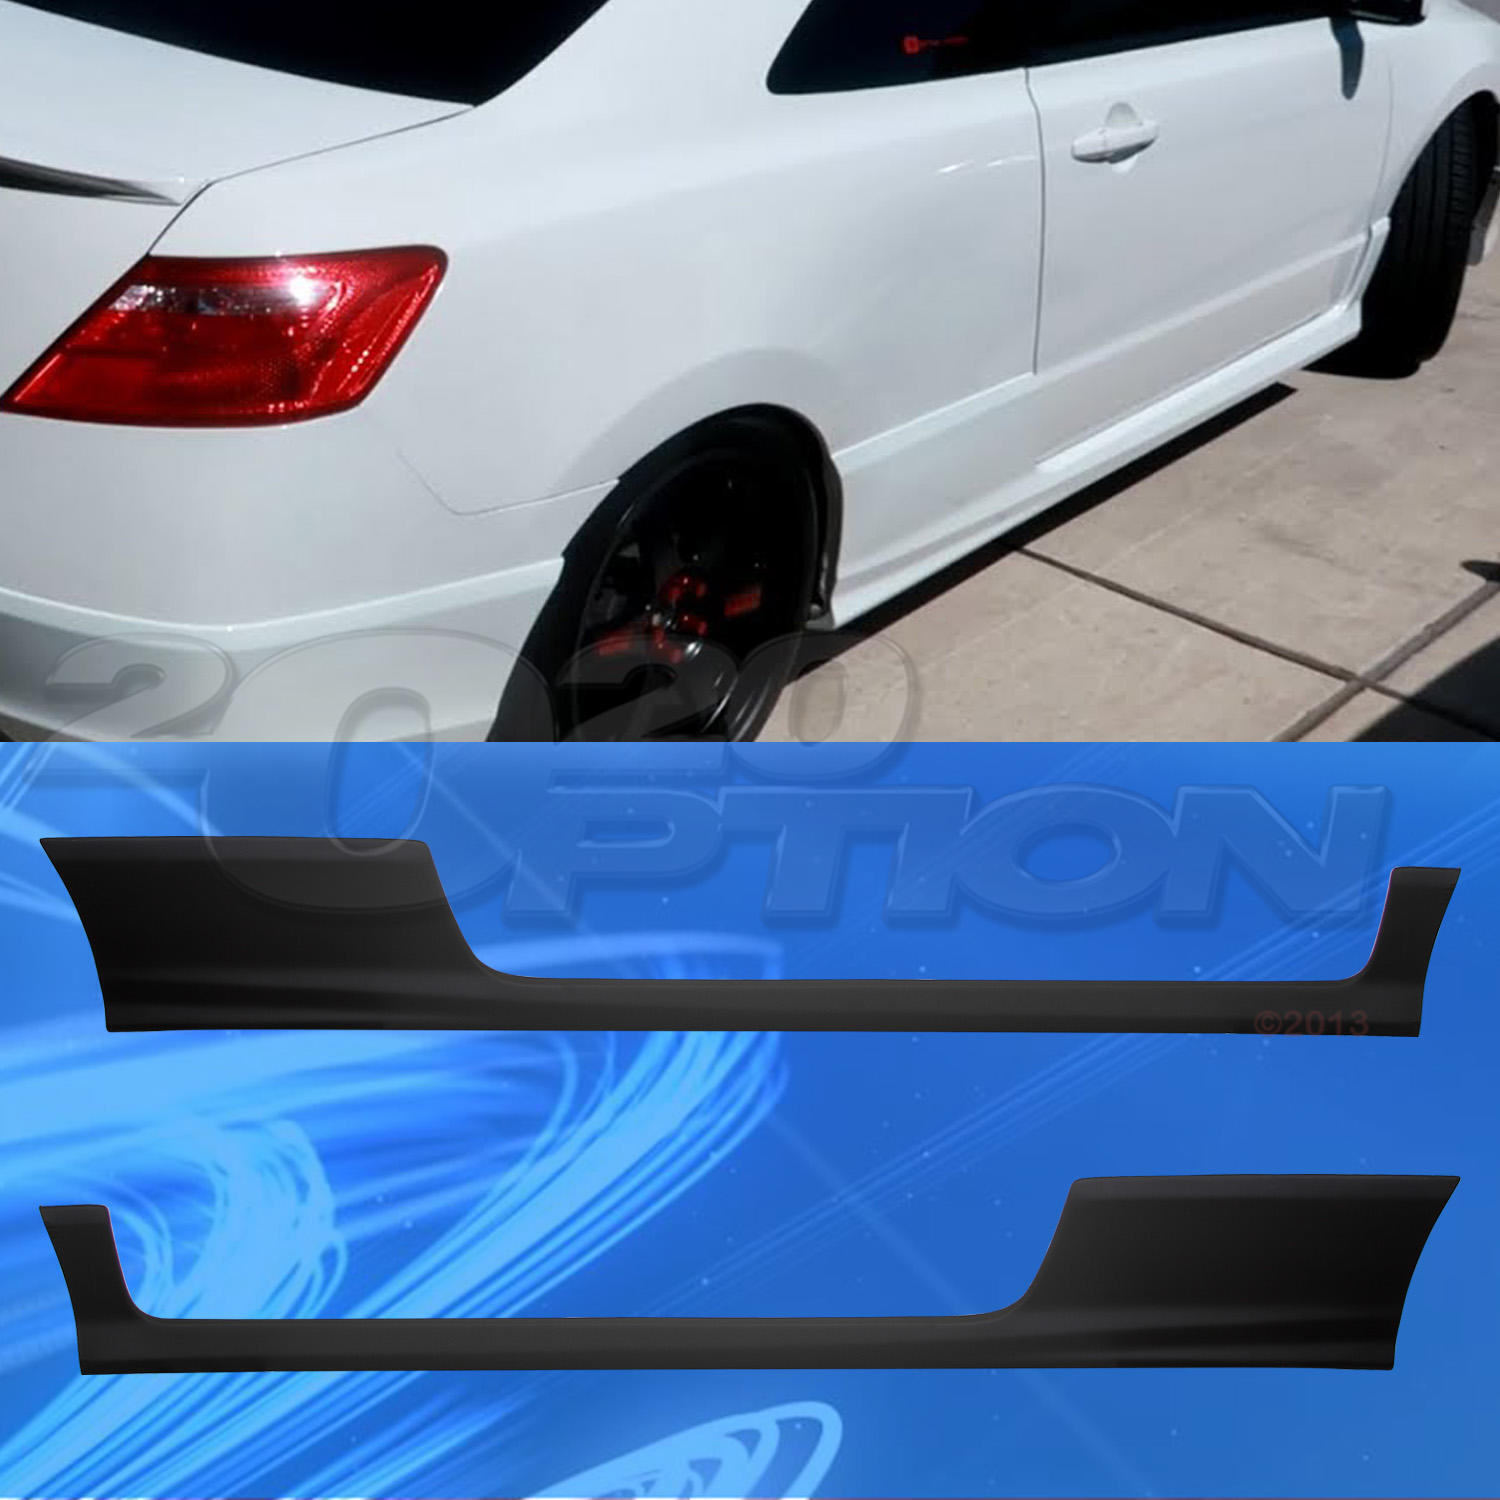 HFP-STYLE PU POLYURETHANE SIDE SKIRTS BODY KIT FOR 06-08 HONDA CIVIC COUPE 2DR